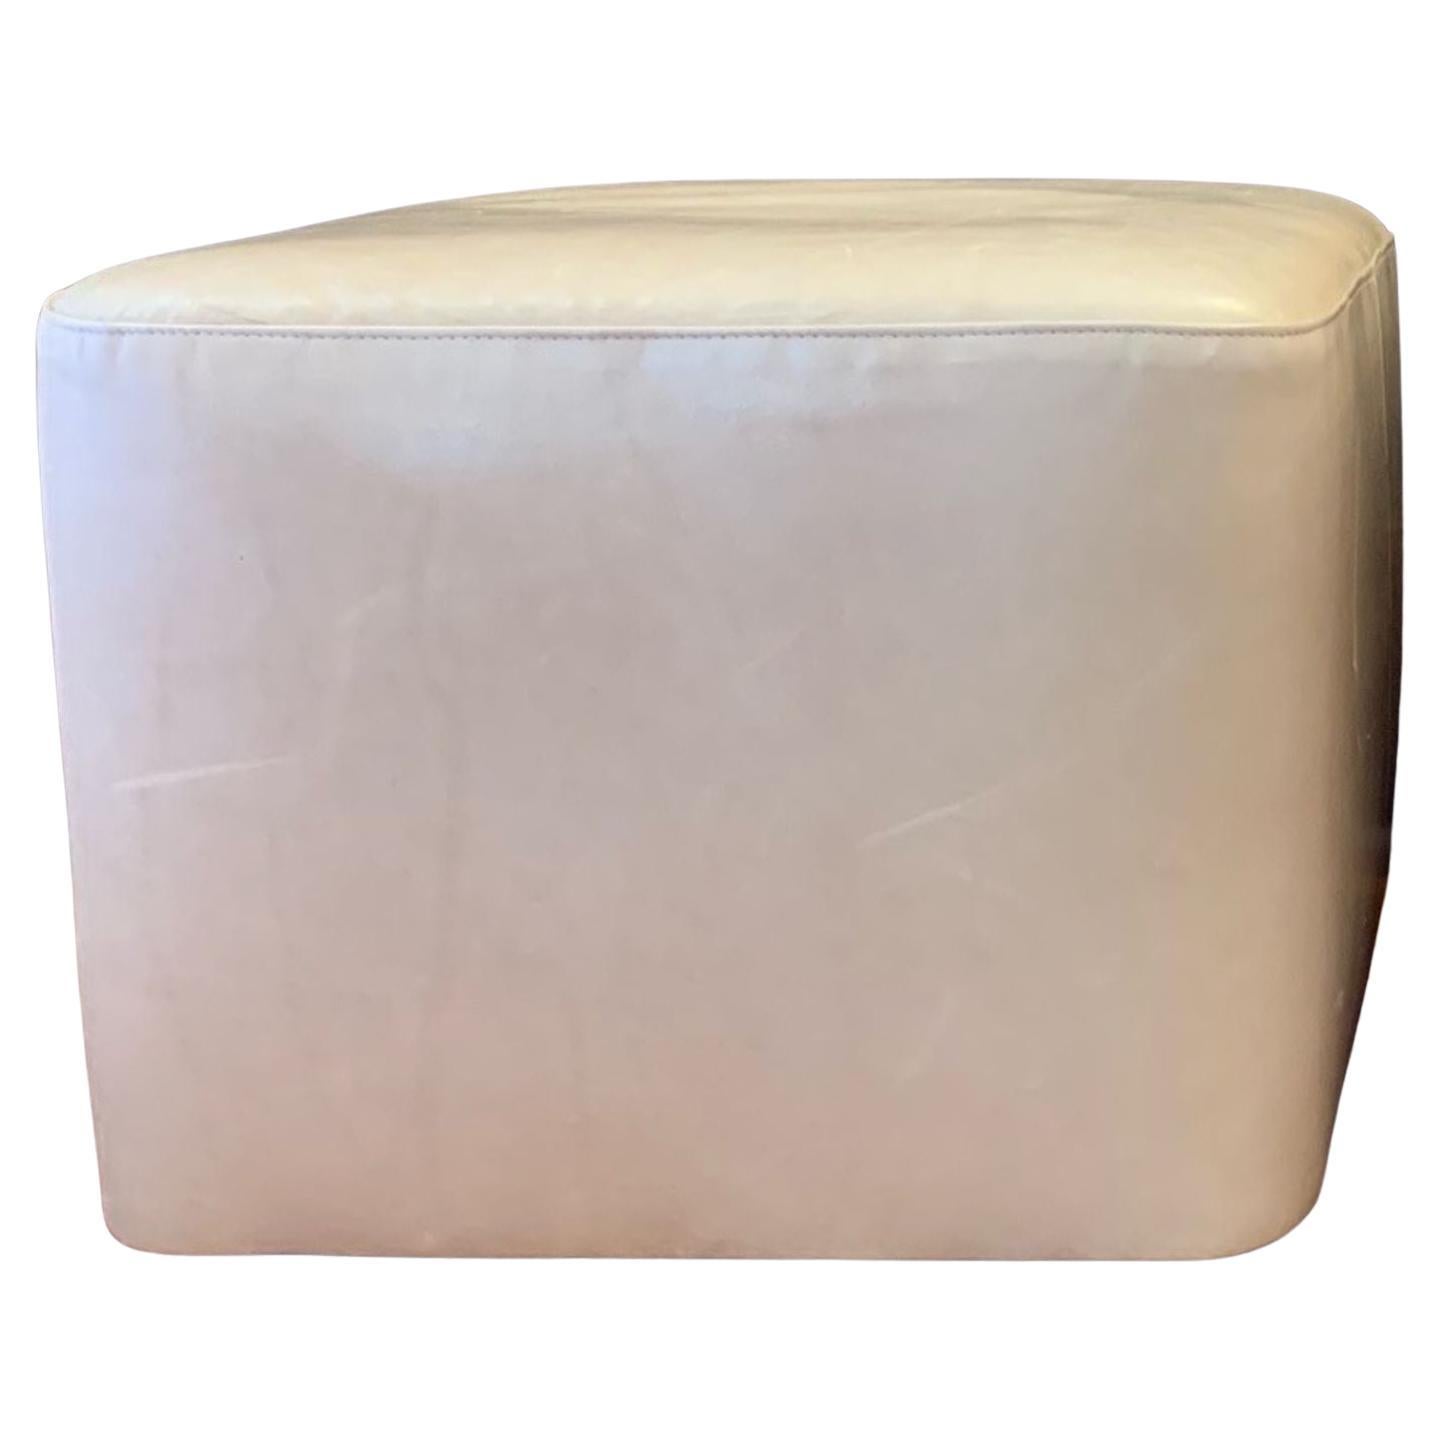 Pair of Contemporary Pale Pink Leather Ottoman Seat on Caster Wheels